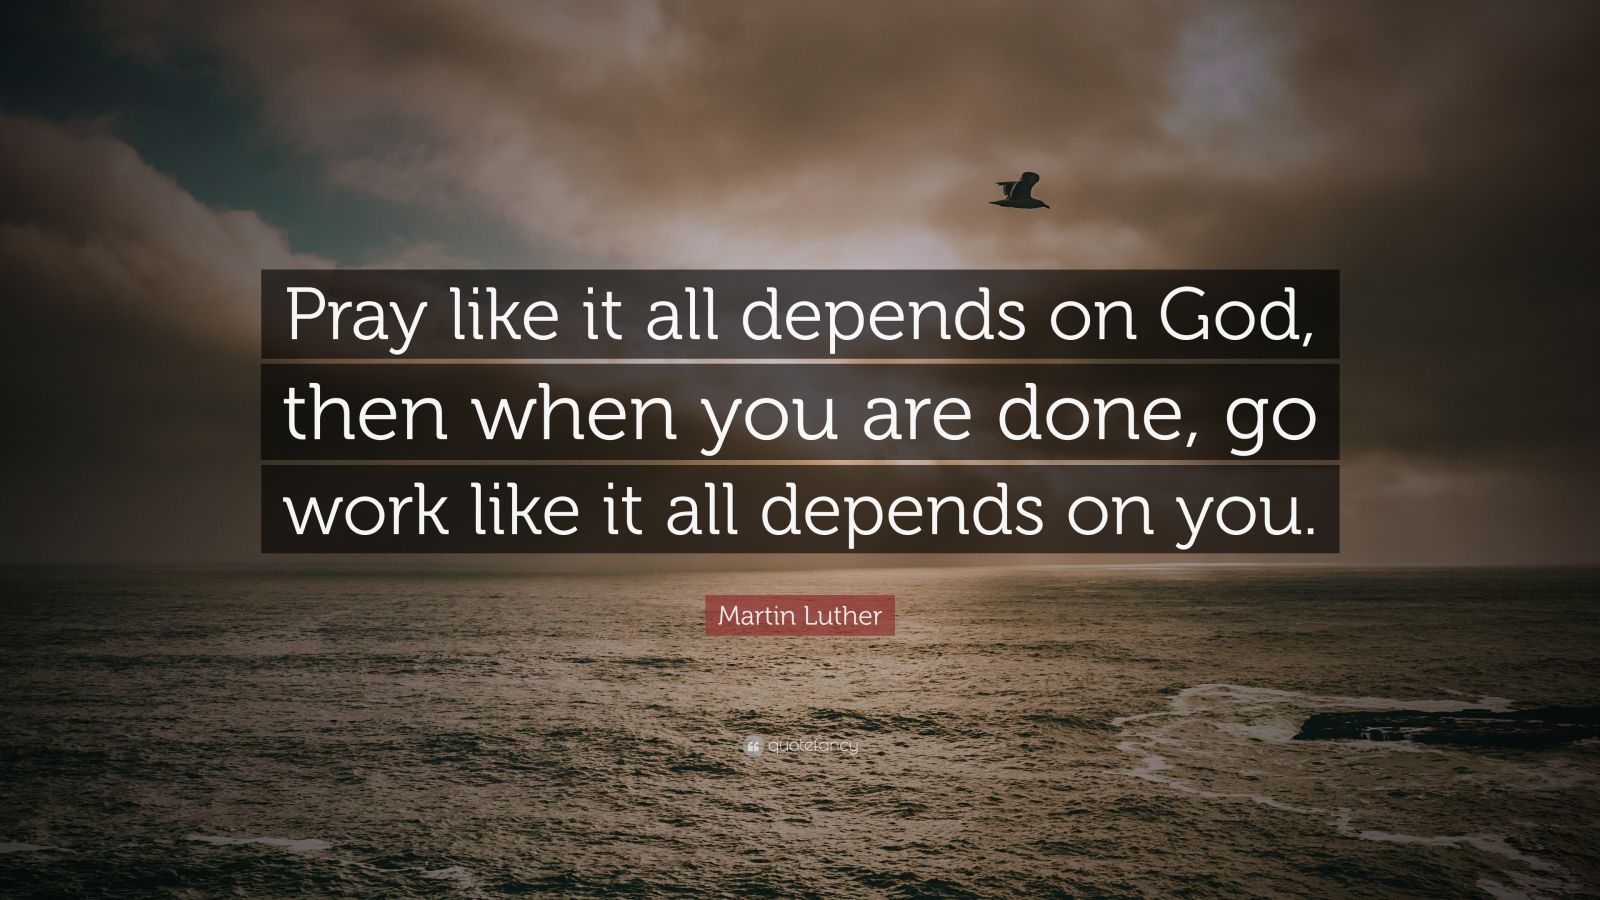 Martin Luther Quote: “Pray like it all depends on God, then when you